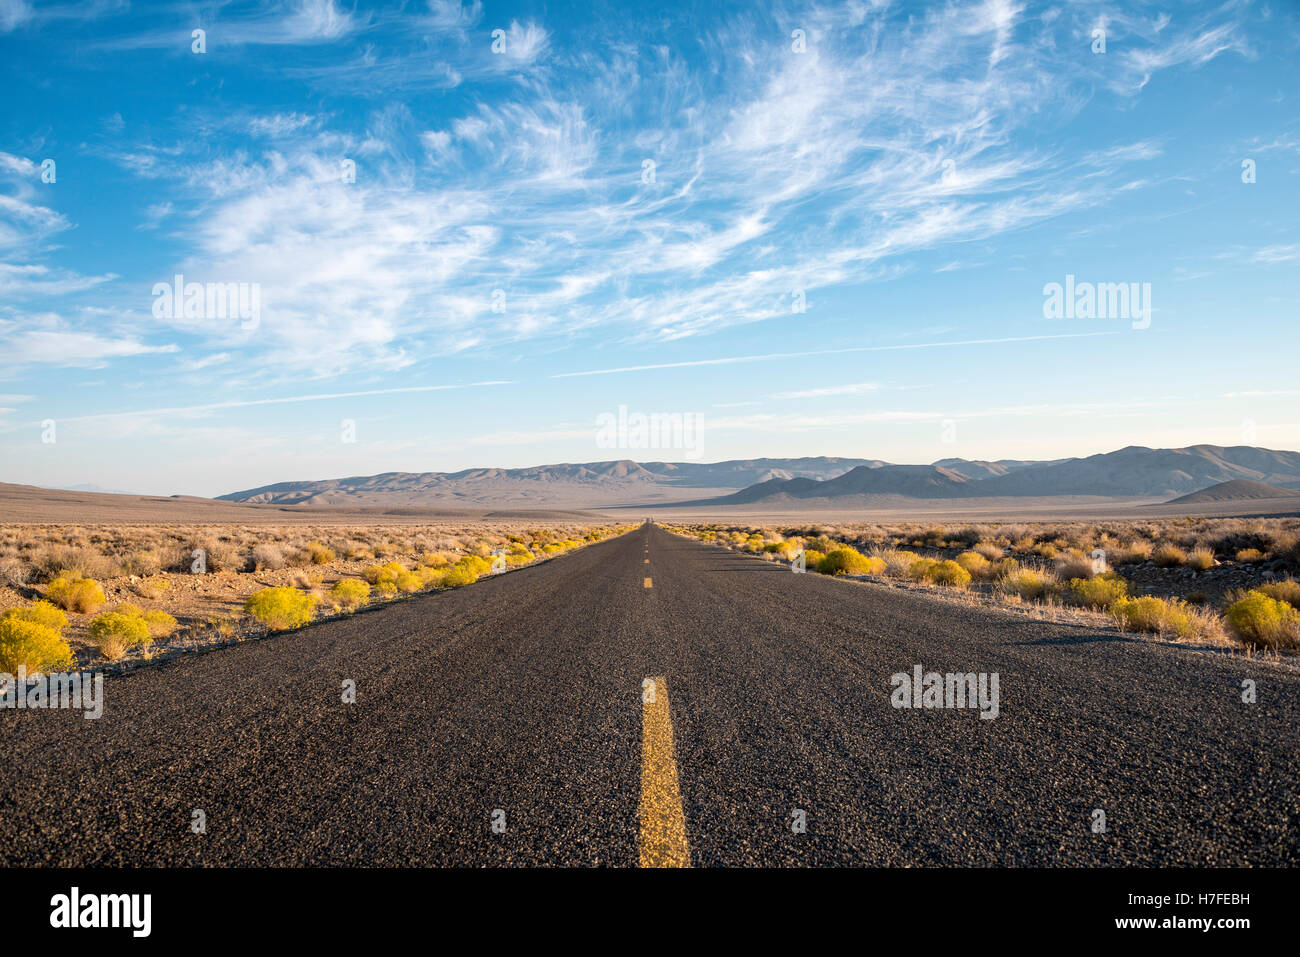 Emigrant Canyon Road, Death Valley National Park, California, USA Banque D'Images